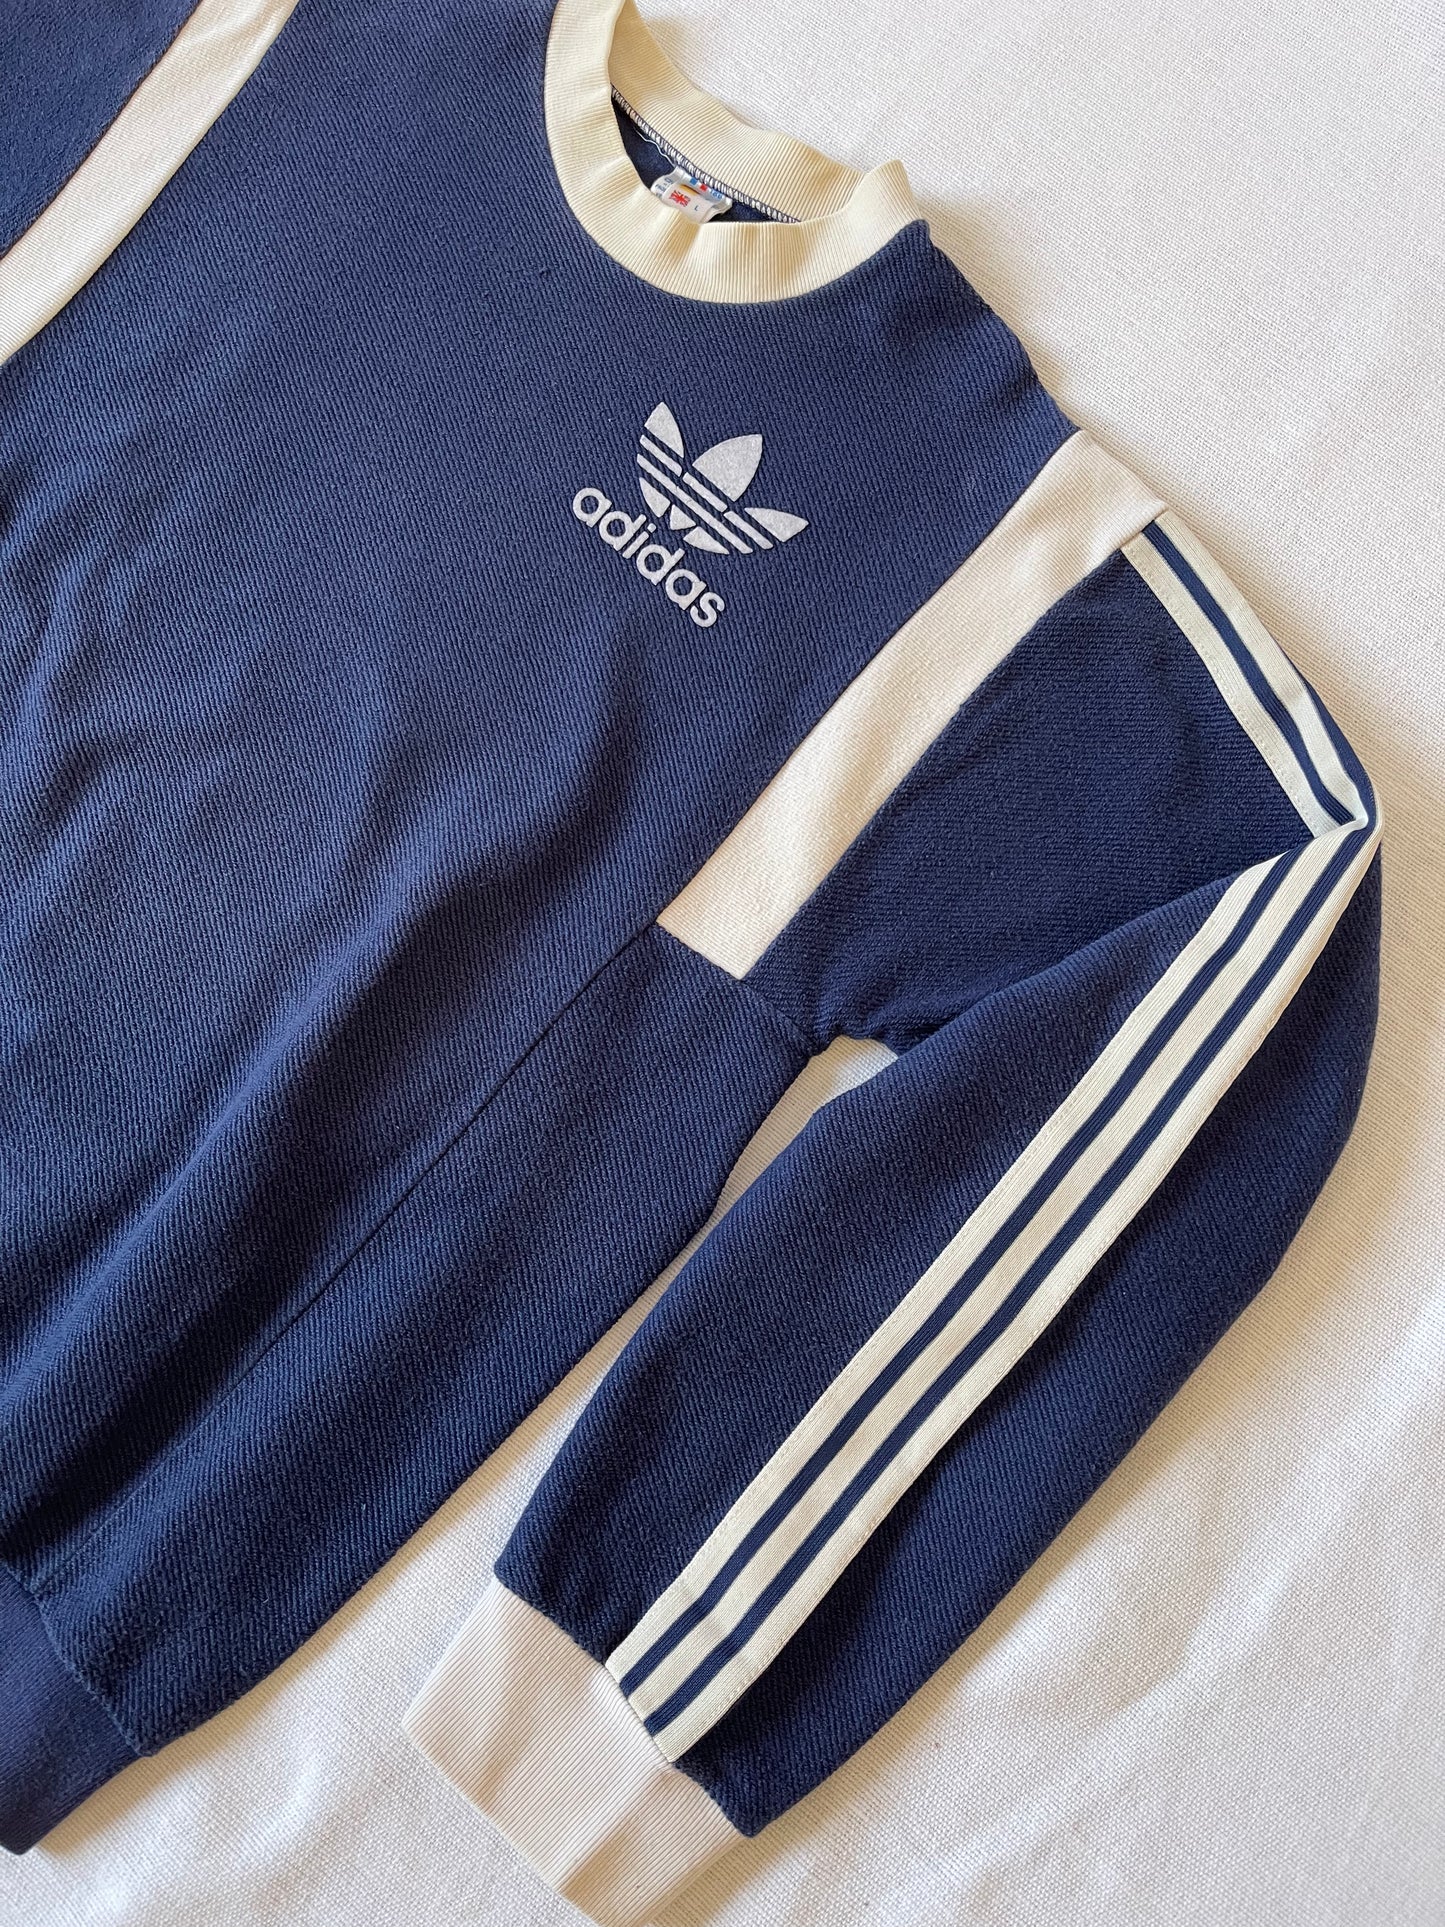 Vintage 80's Adidas Sweatshirt Crew Neck Blue Made in France 100% Cotton Ribbed Cotton Size M